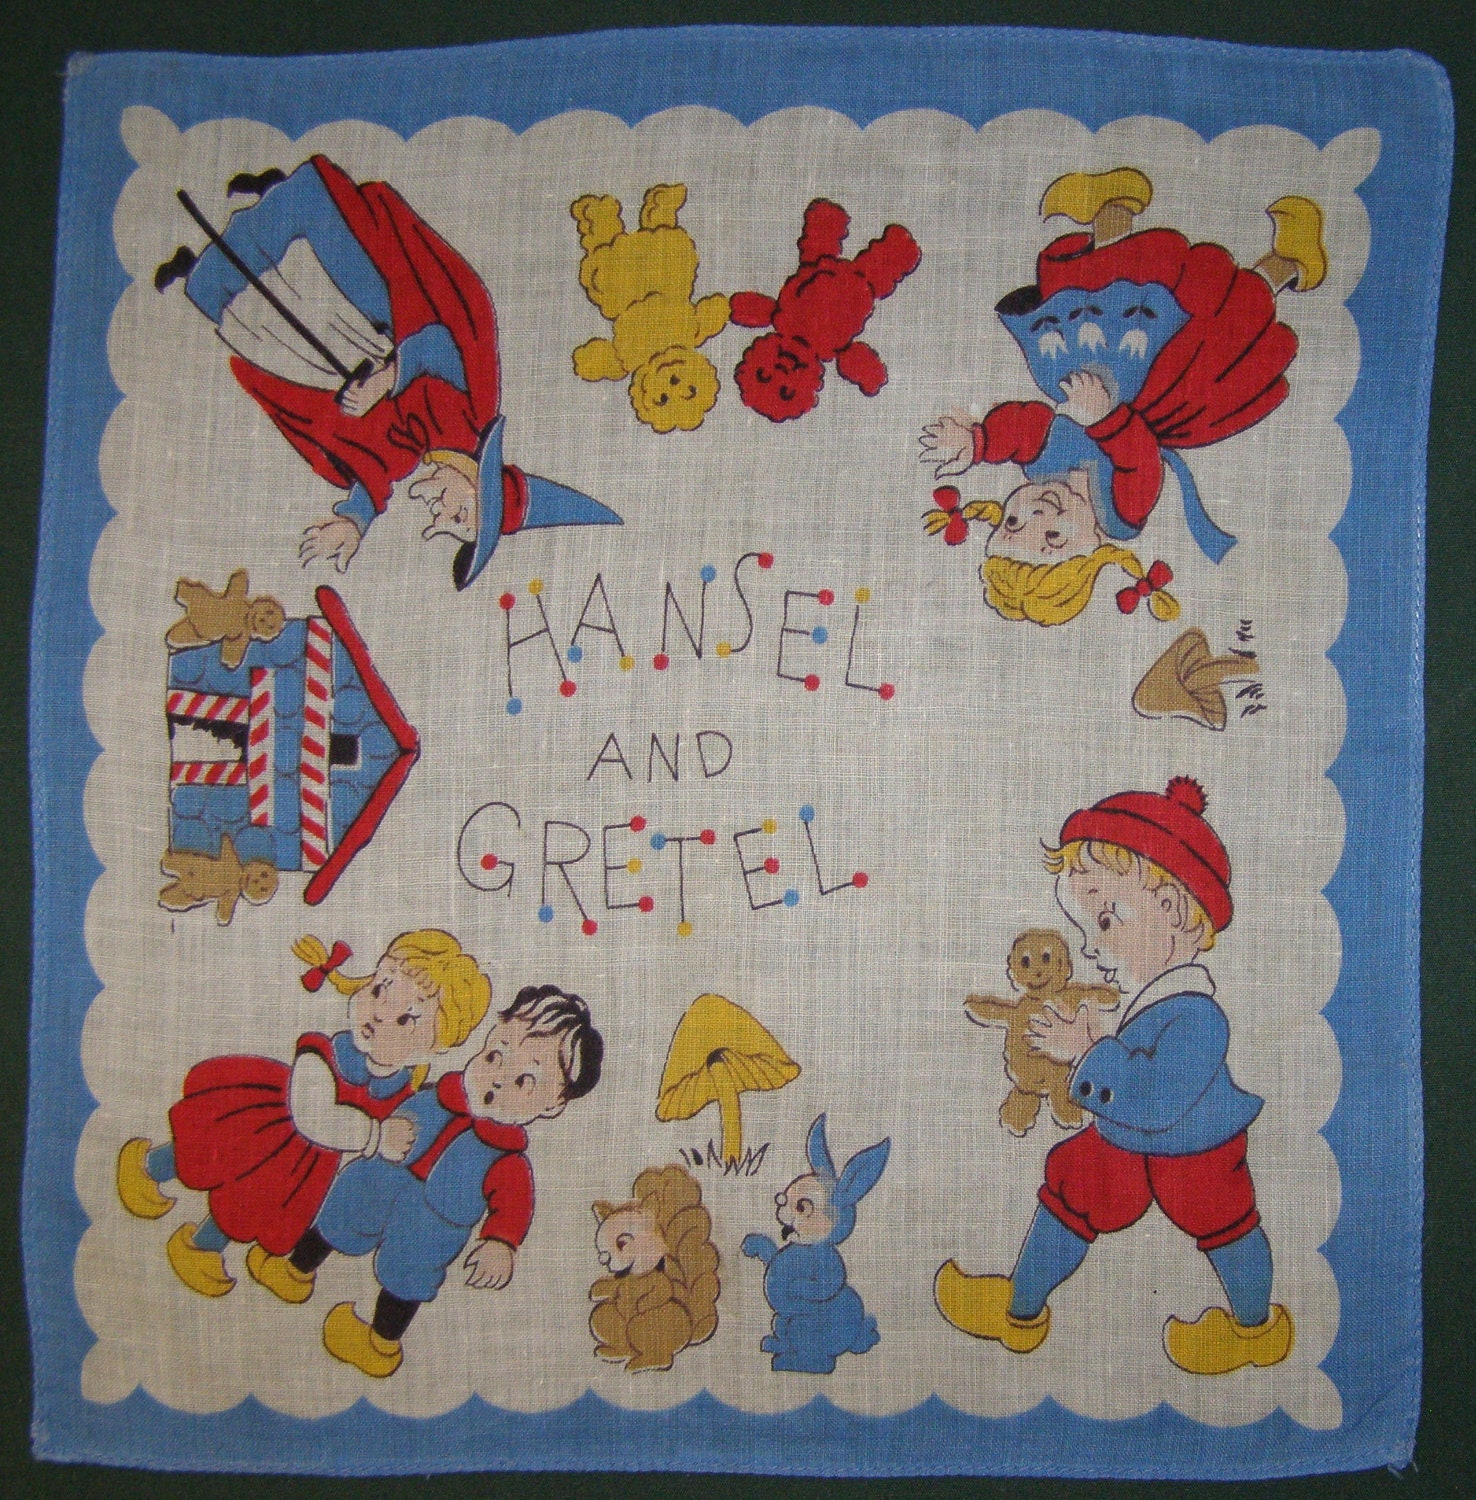 Vintage 1950's Child's Hankie with Hansel and Gretal Fairy Tale H-13 - VintageSouthernLady